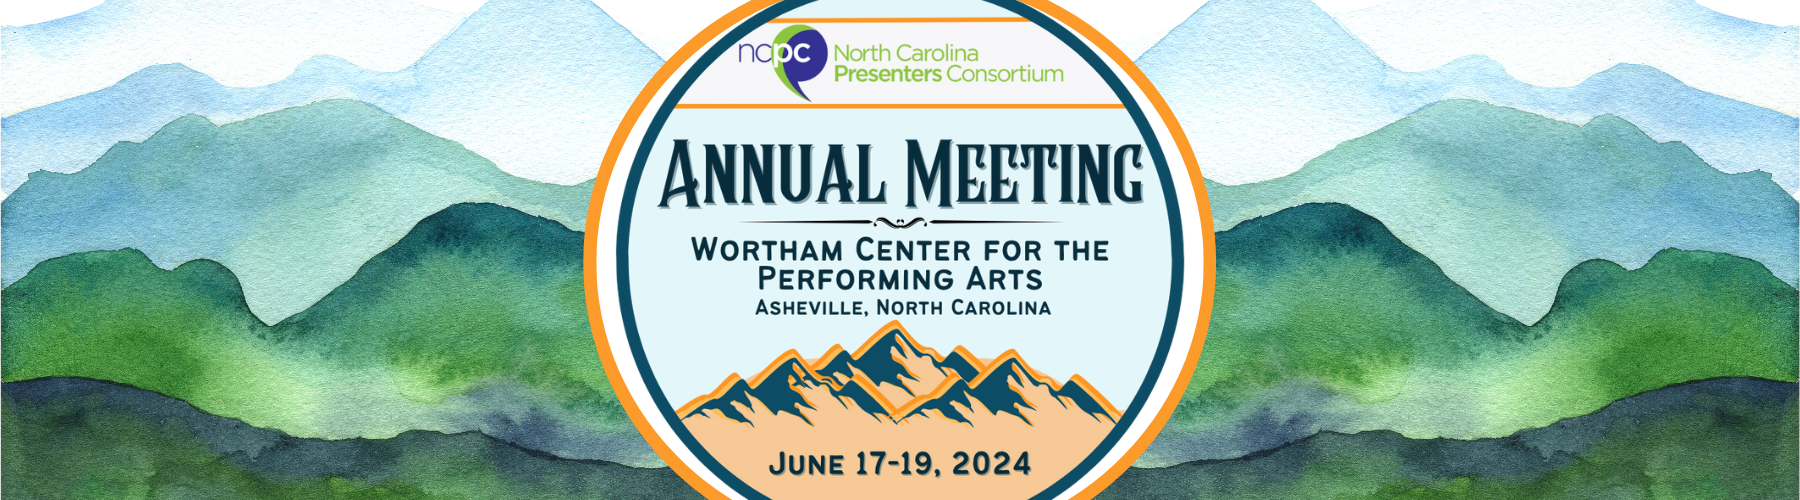 NCPC Annual Meeting Decorative Banner with the following information: Wortham Performing Arts Center, Asheville, North Carolina, June 17-19, 2024